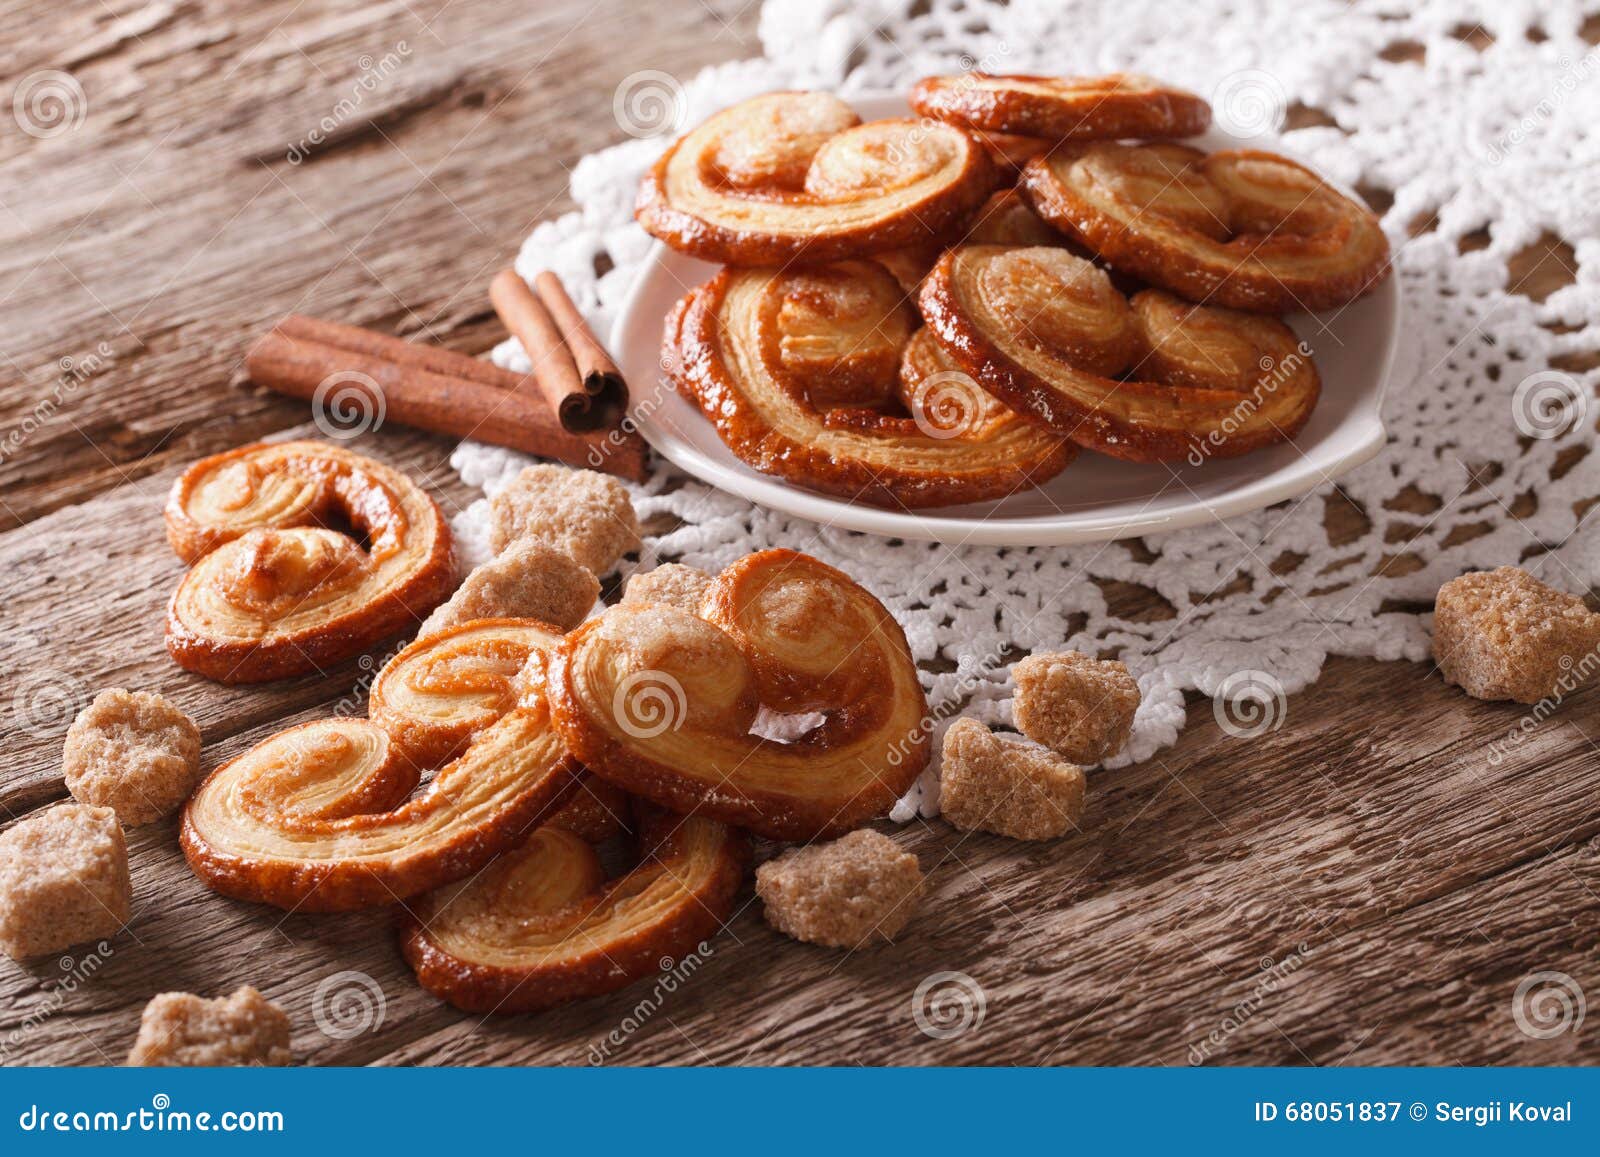 palmiers biscuits with sugar and cinnamon close-up, horizontal